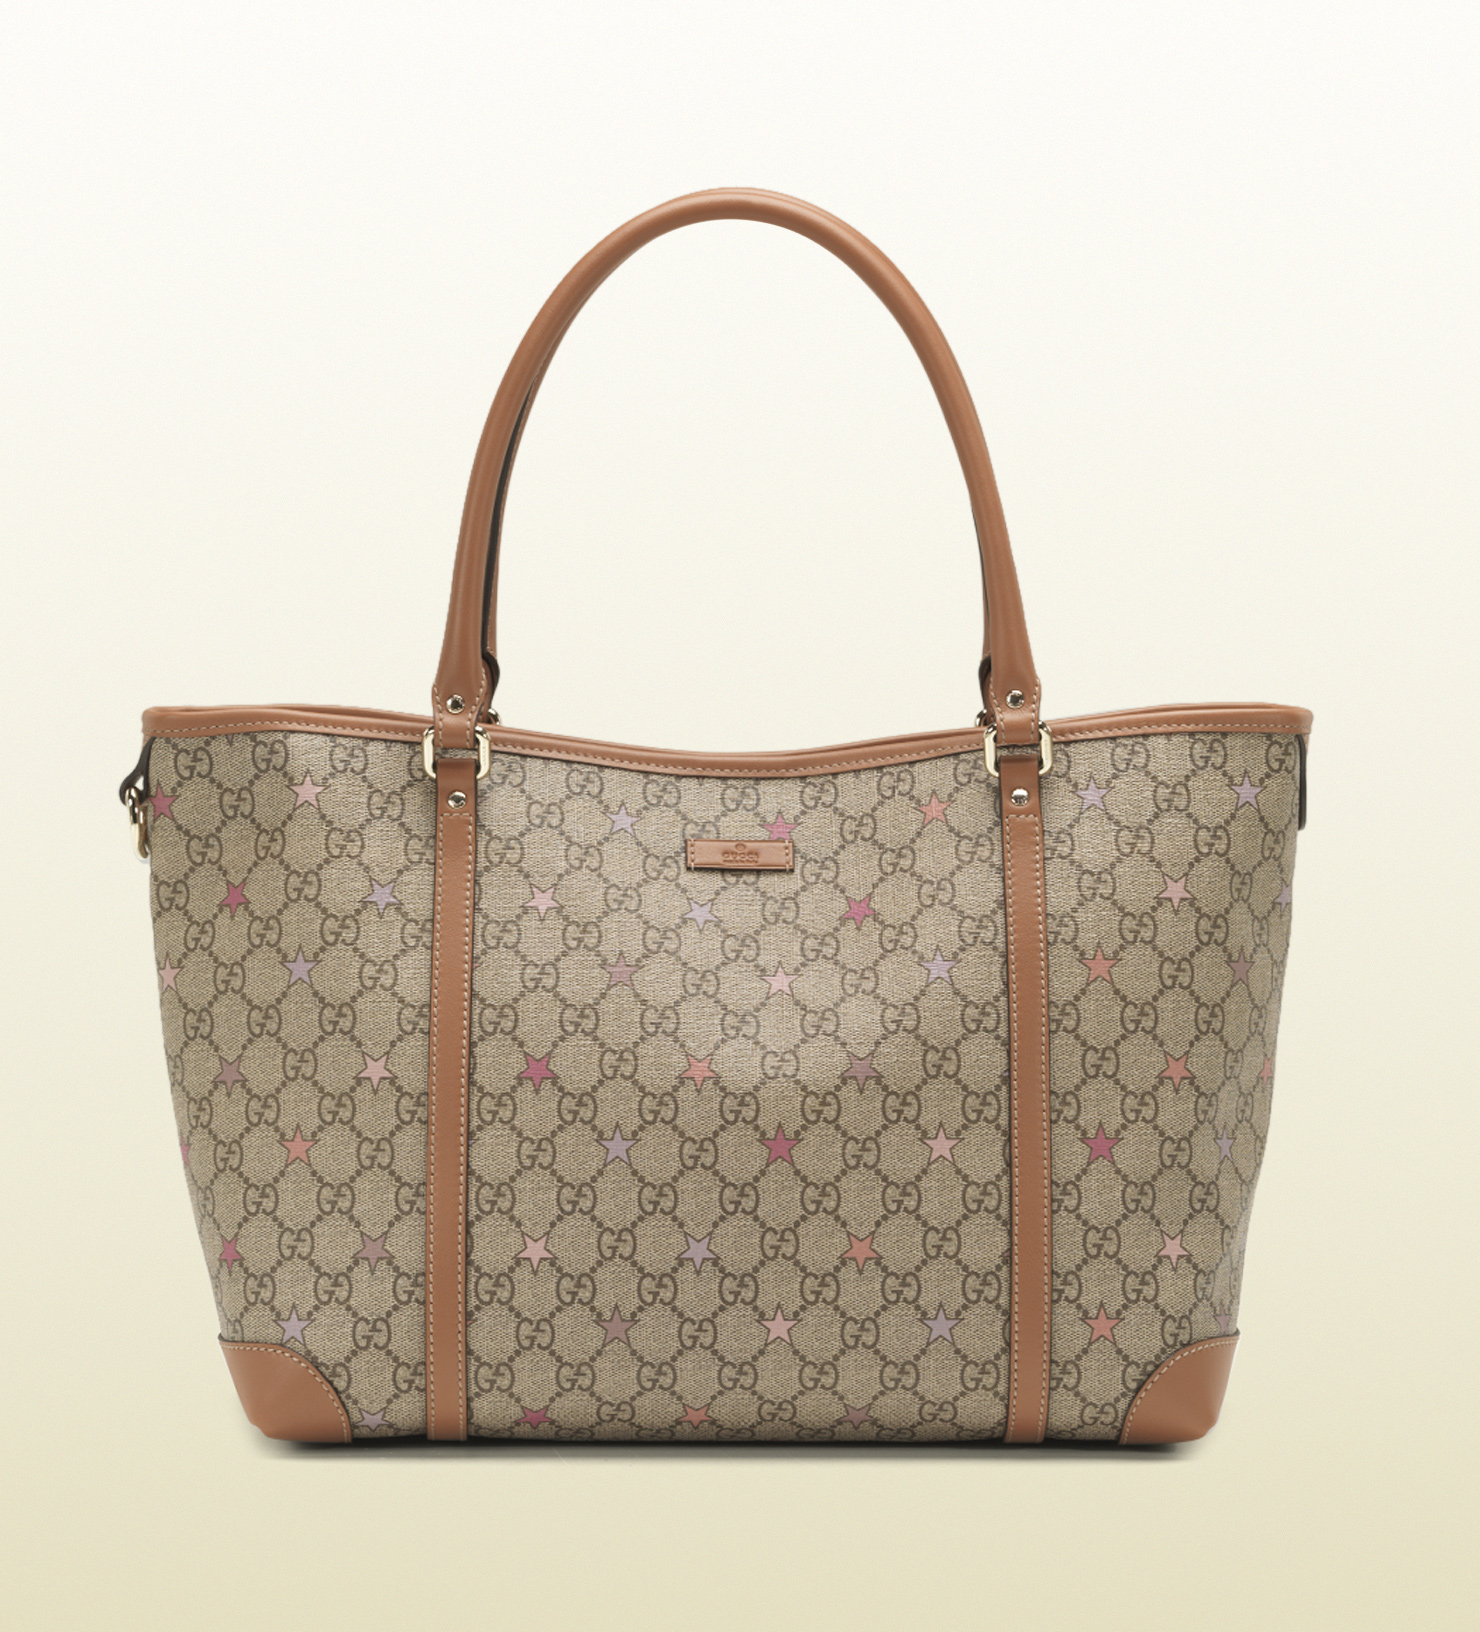 Gucci Large Gg Supreme Canvas Tote with Pouch in Beige | Lyst